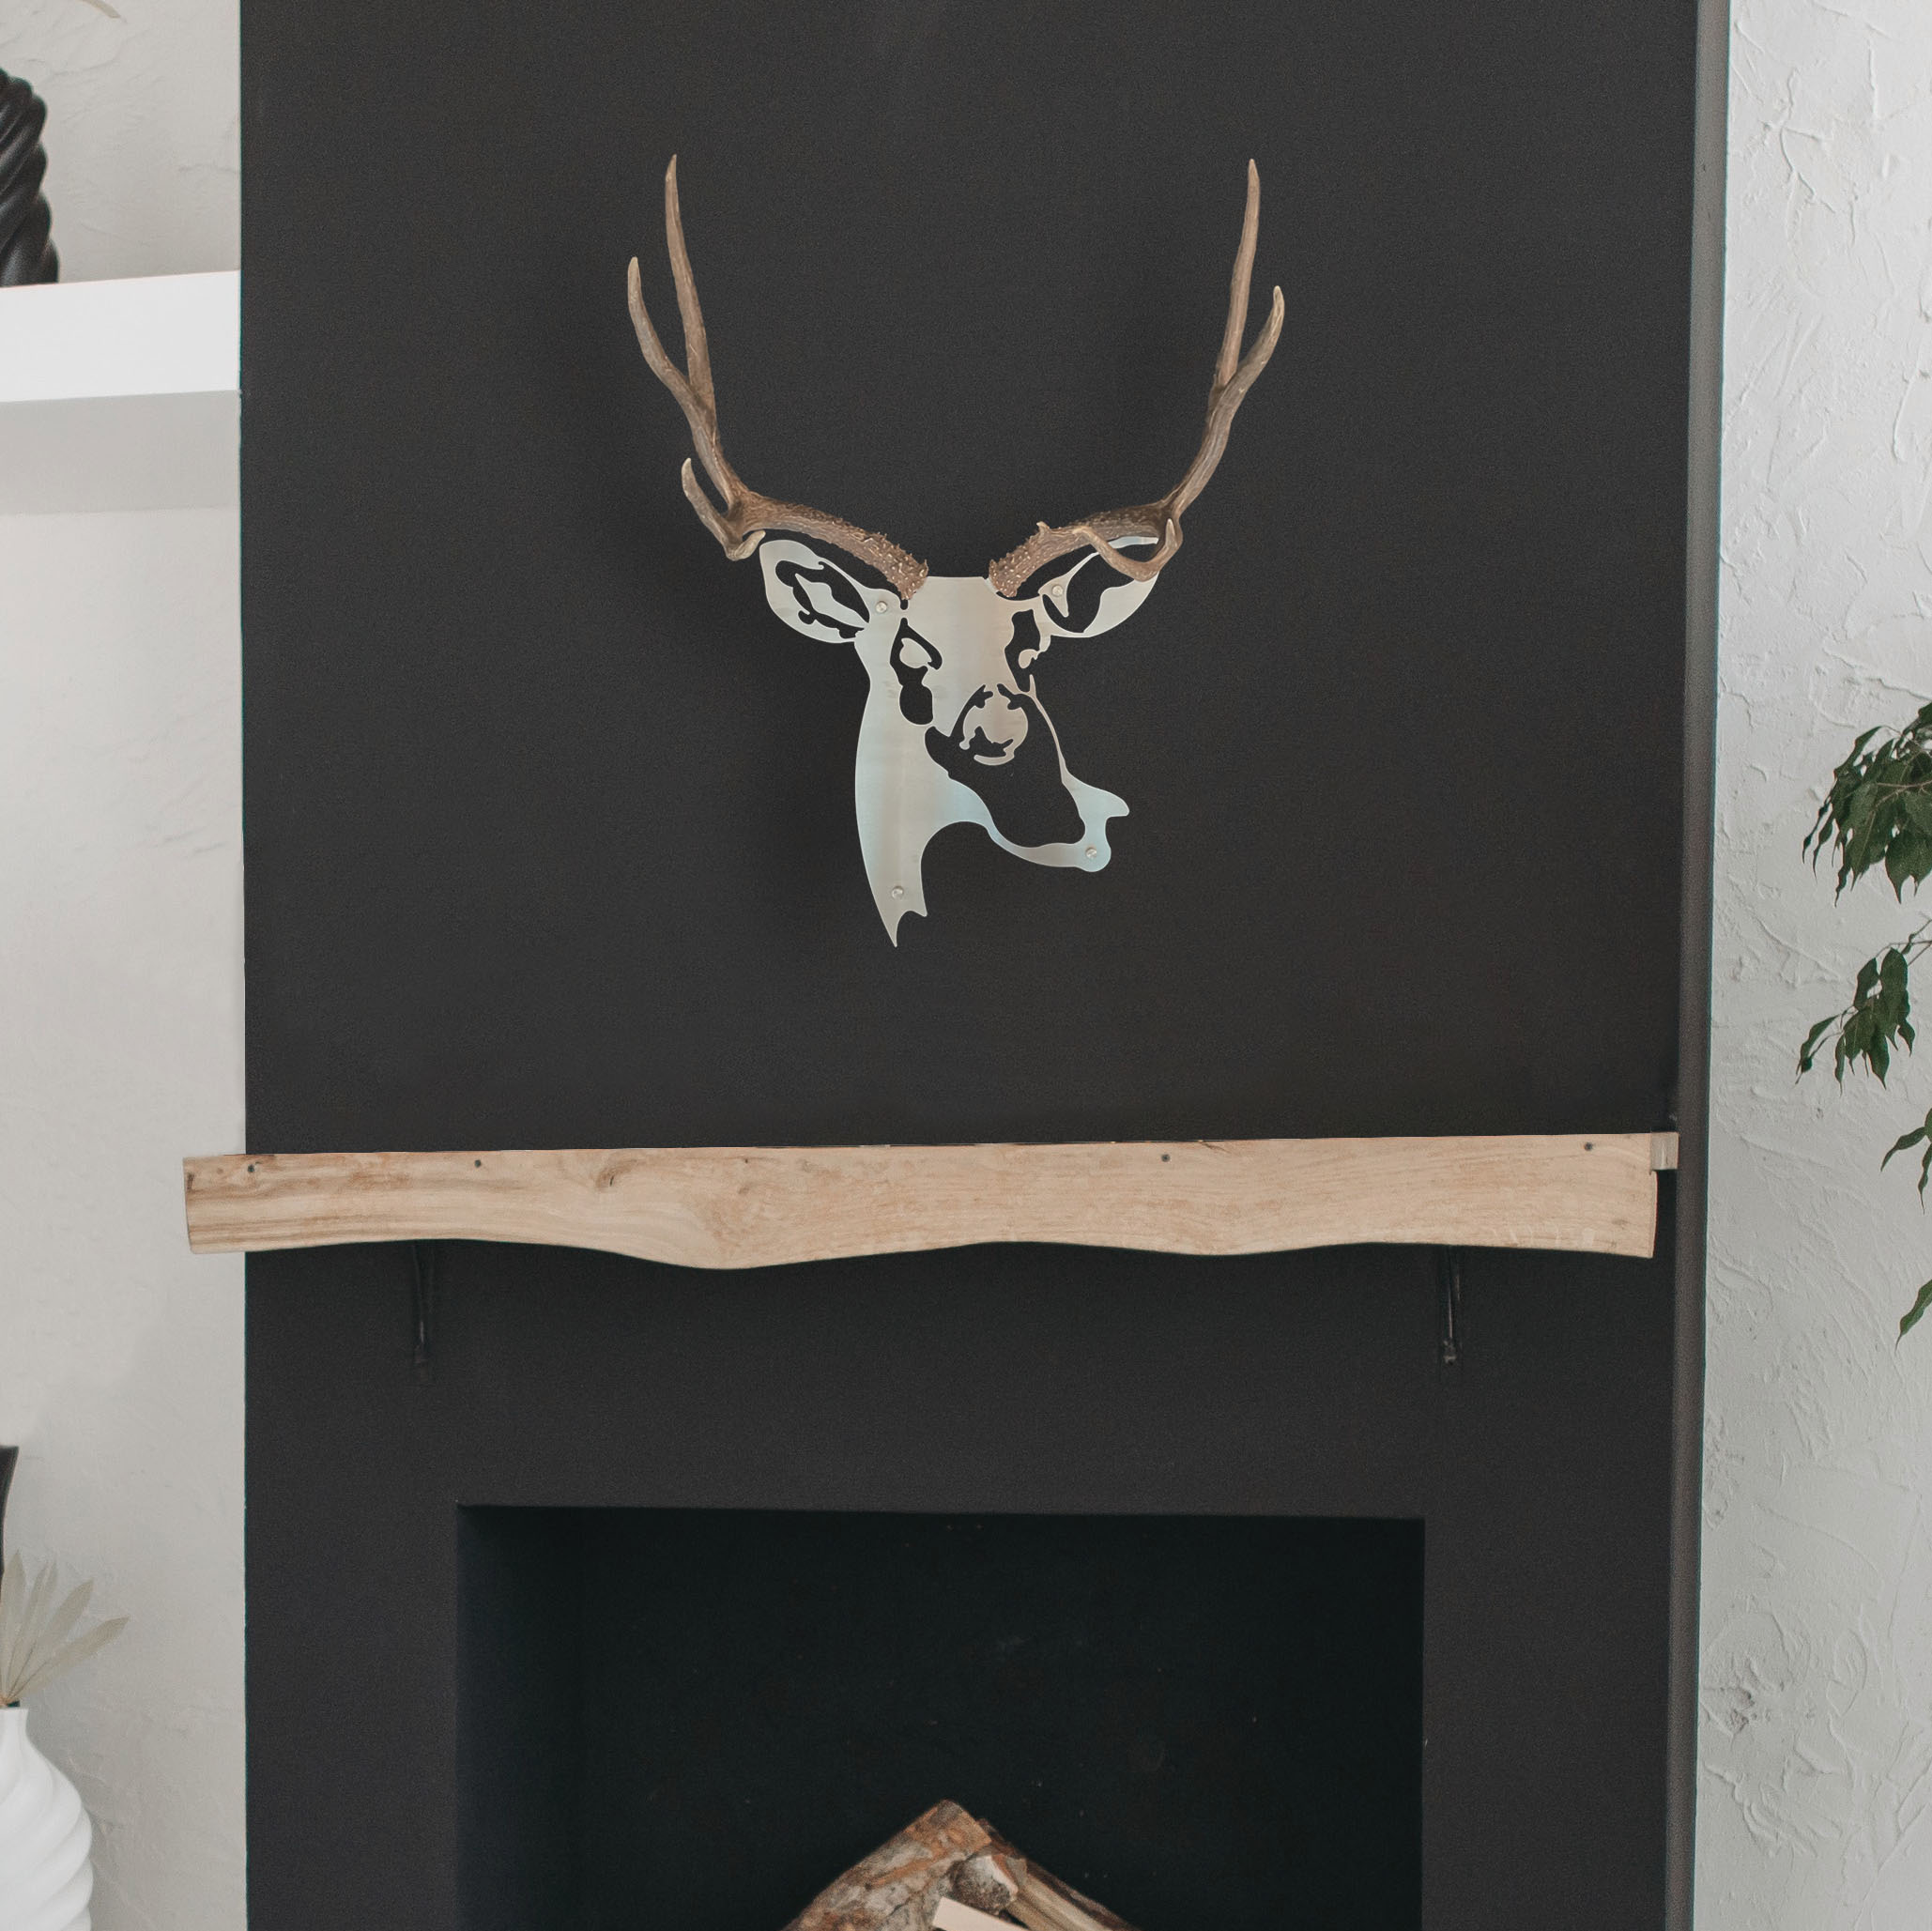 A metal wall decor made from real shed Deer antlers mounted on a metal head above a fireplace